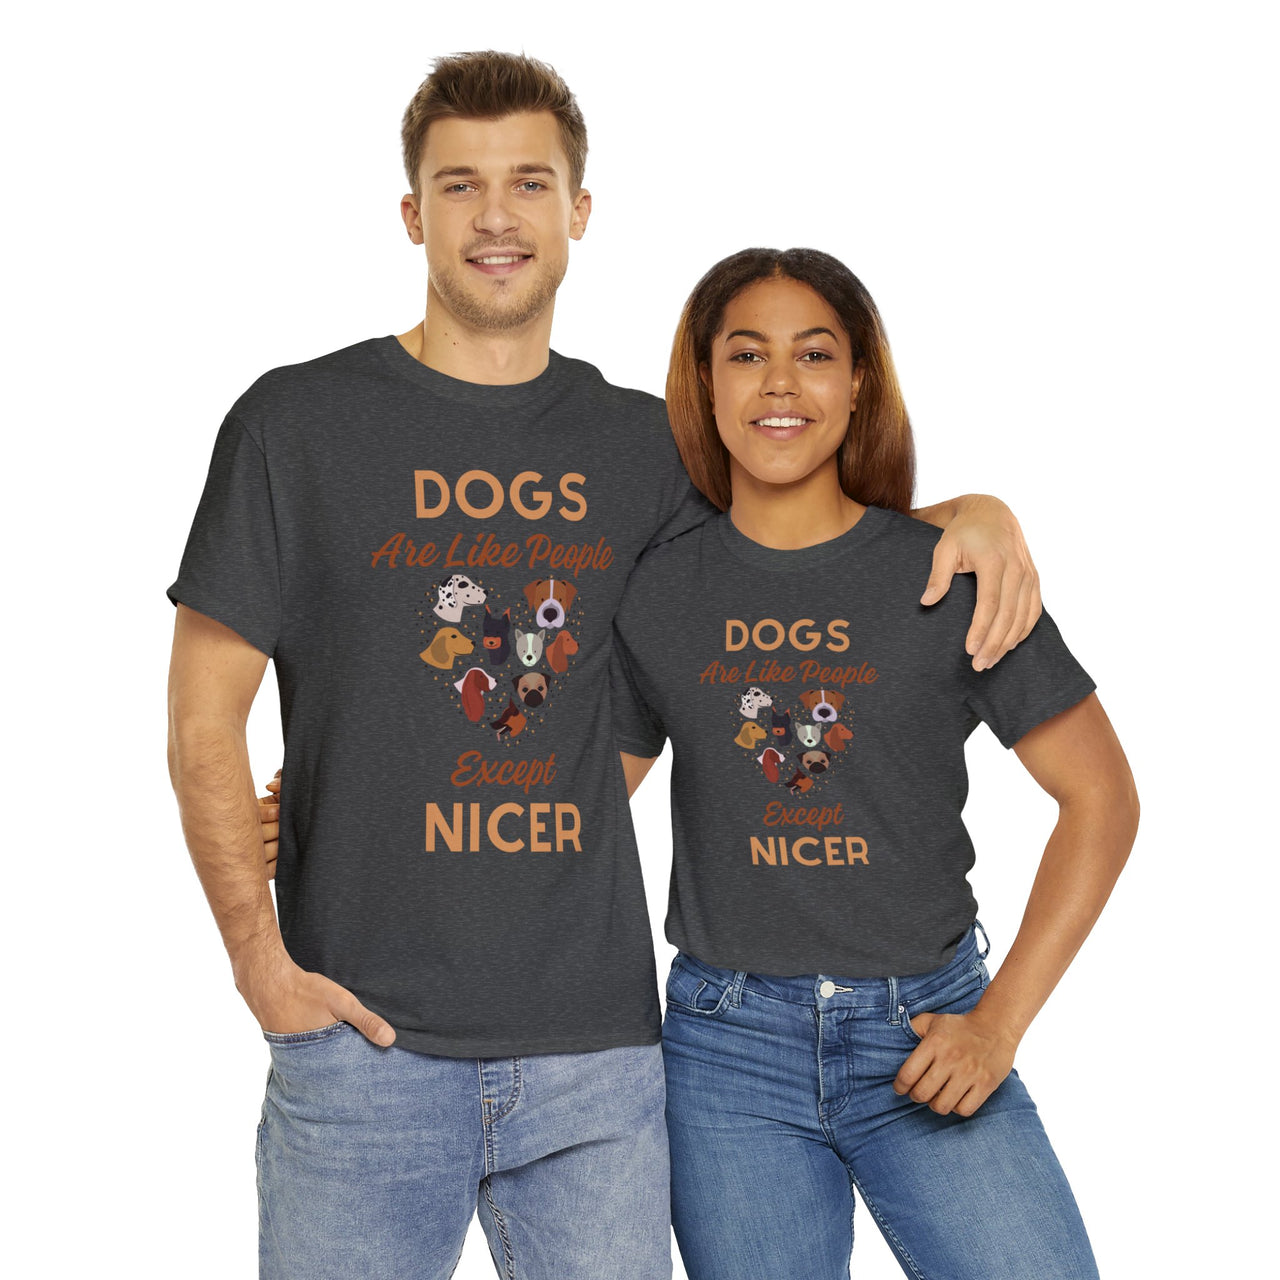 Dogs Are Like People Except Nicer Unisex T-Shirt